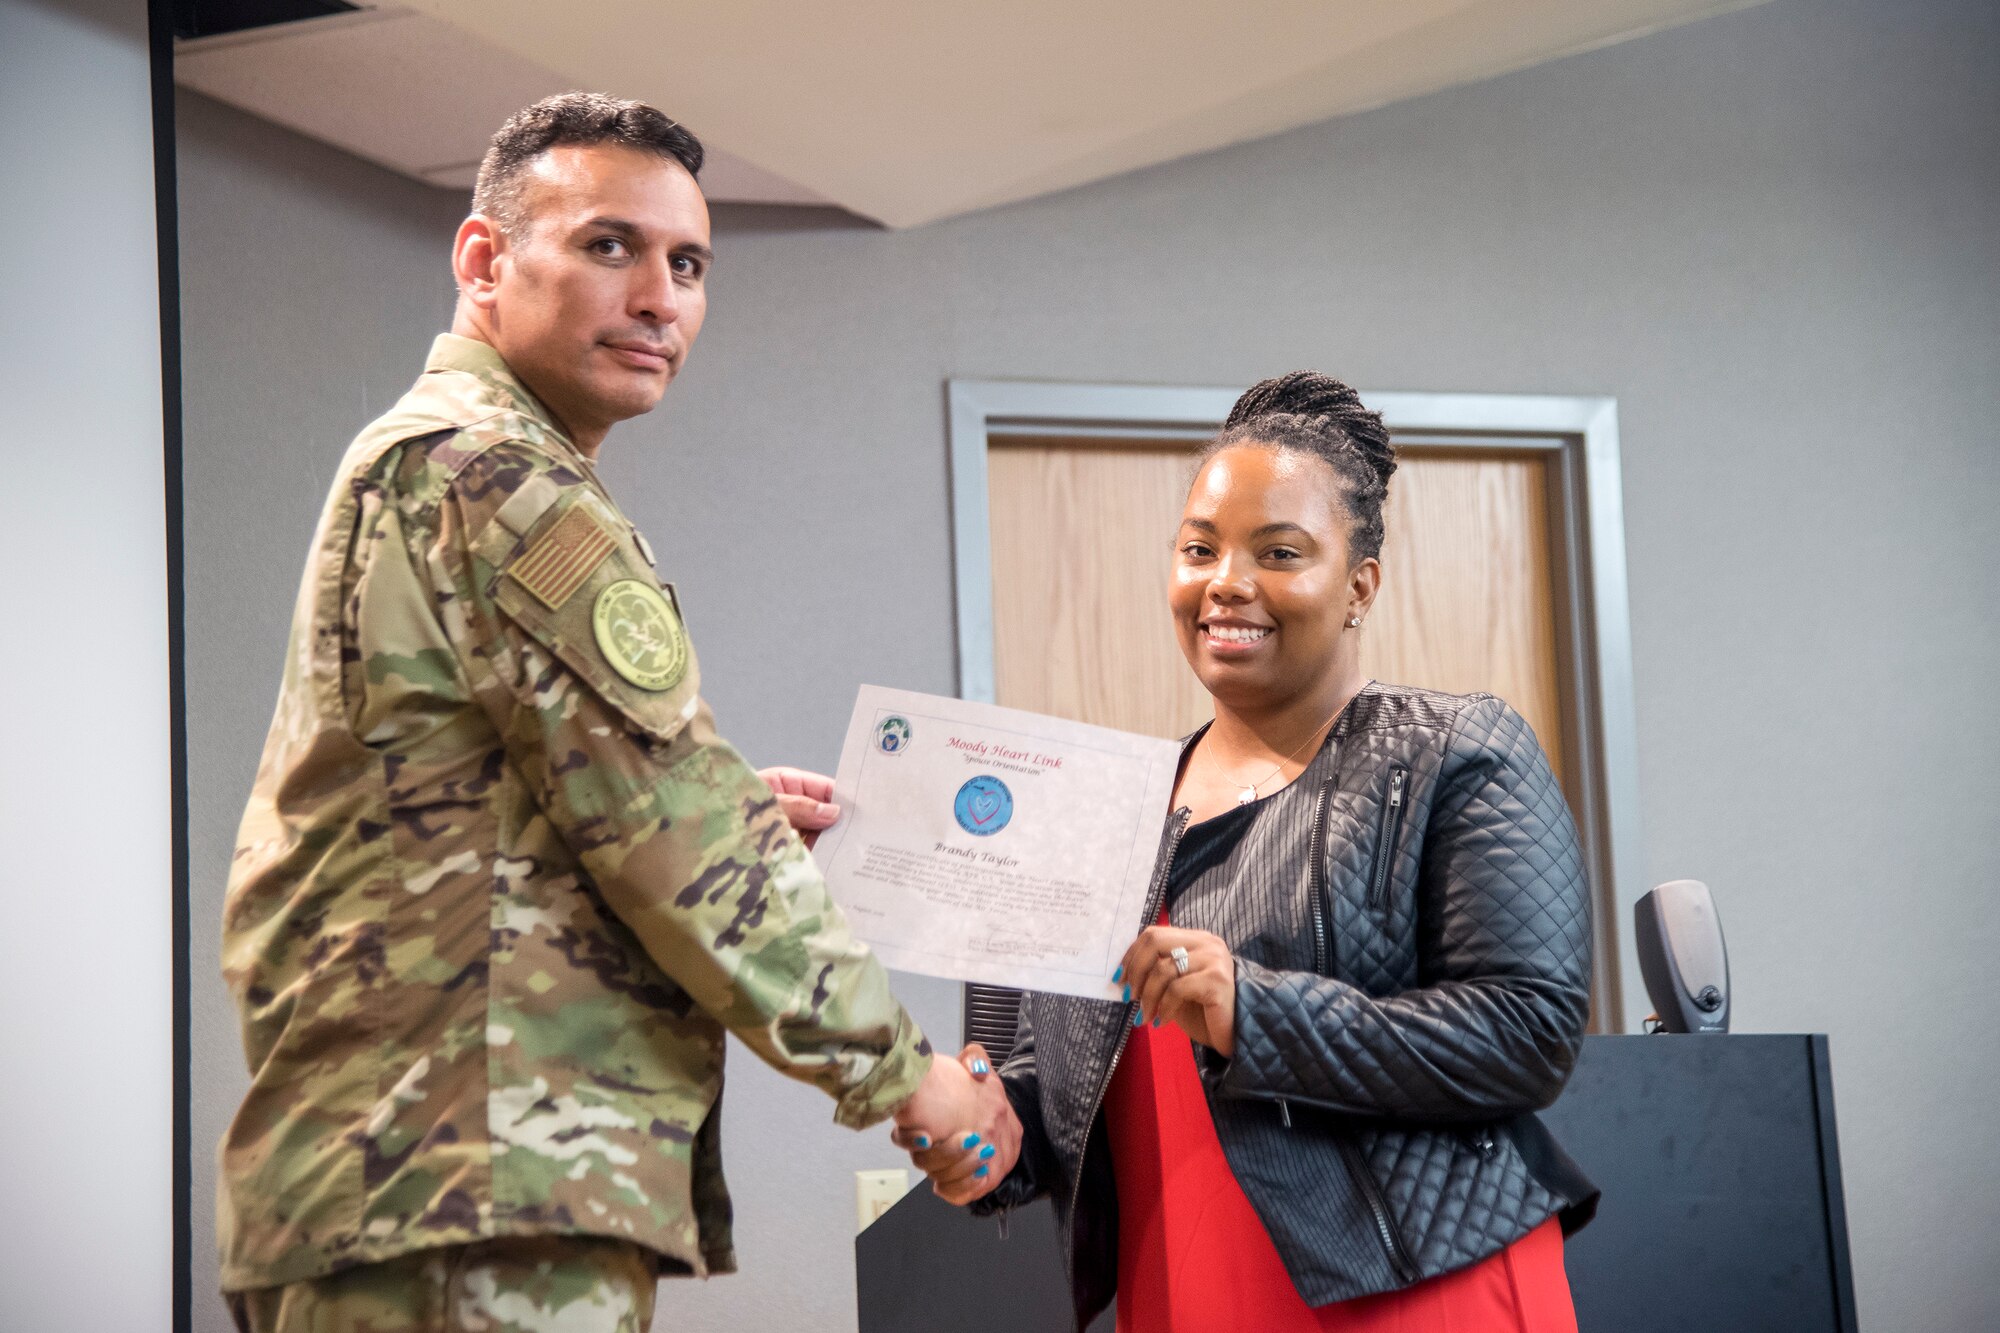 Col. Benjamin Conde, left, 23d Wing vice commander, coins a Team Moody spouse during a Heart Link spouse orientation Aug. 21, 2019, at Moody Air Force Base, Ga. The orientation is geared toward providing all spouses and family members with the necessary support and information to ensure that they are aware of the resources available to them such as: Tricare, legal assistance, Airman and Family Readiness Center and financial assistance. (U.S. Air Force photo by Airman 1st Class Eugene Oliver)